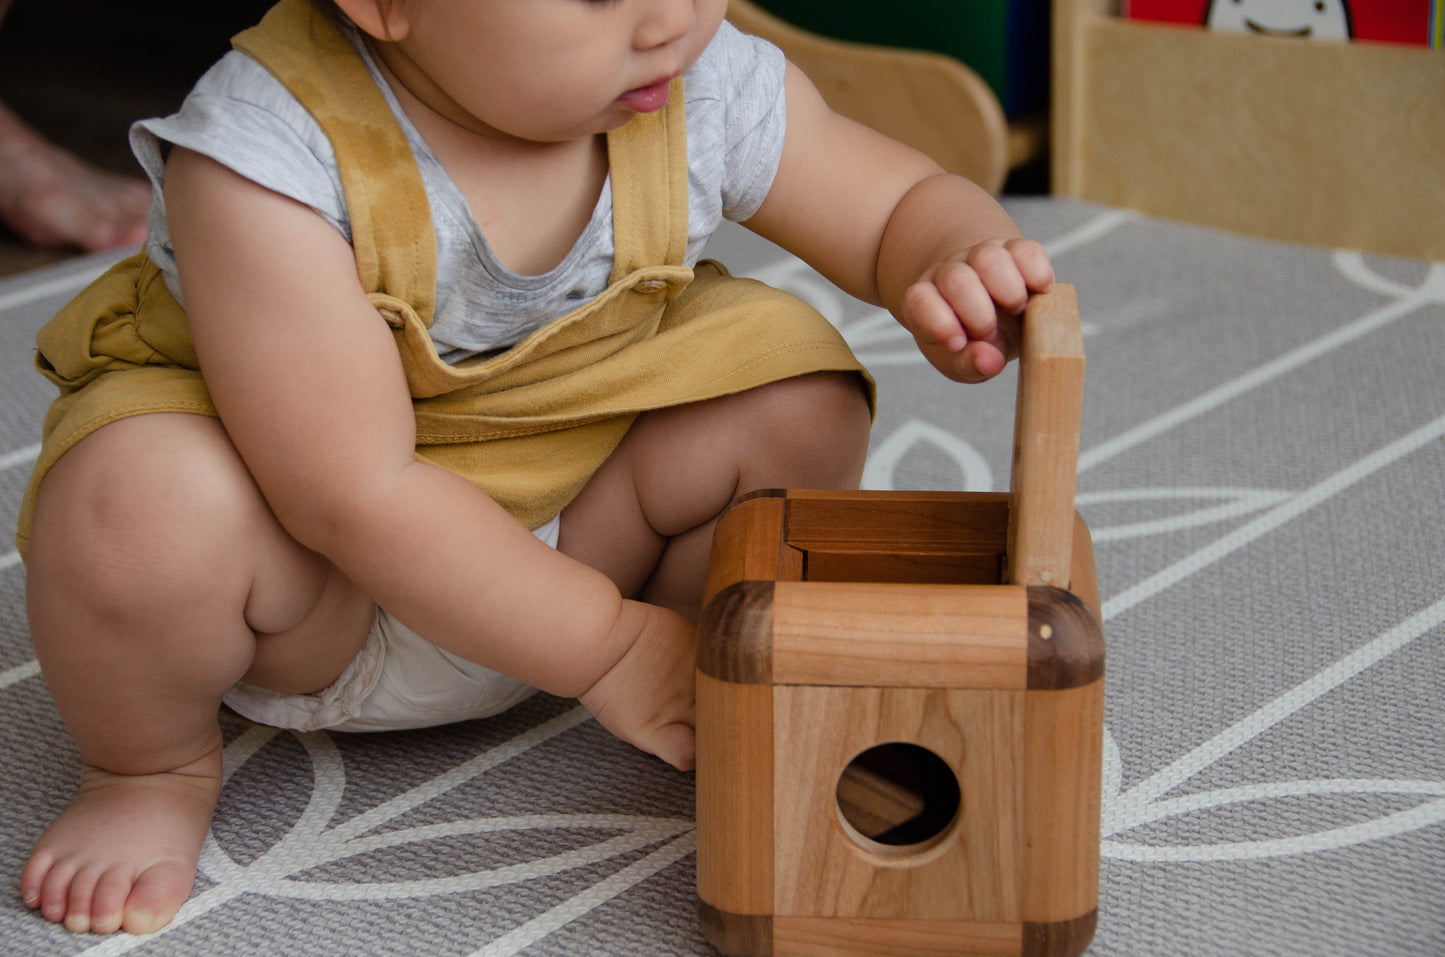 Baby girl happily opens the Cubos Lite, eager to explore and interact with the contents, filled with excitement and curiosity during playtime.